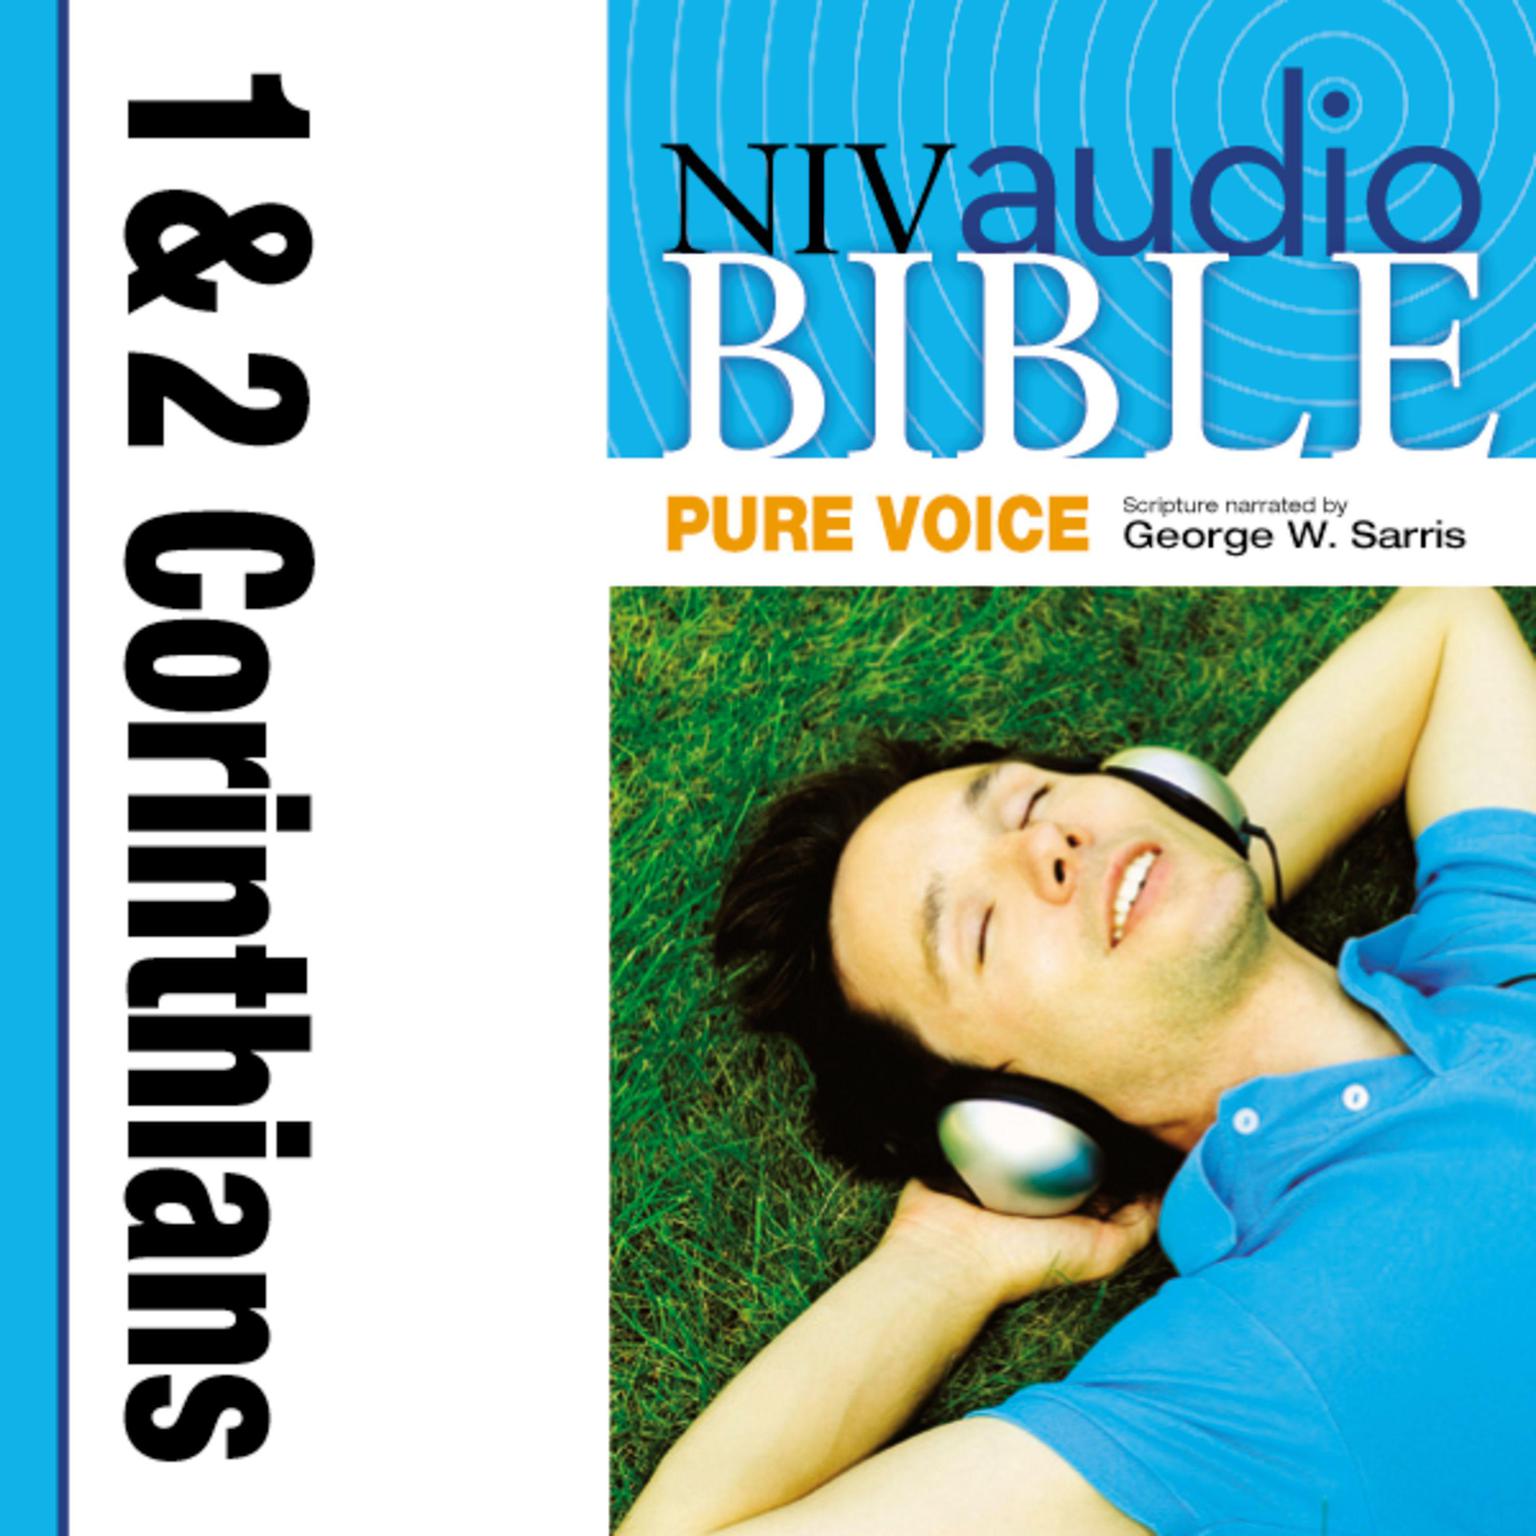 Pure Voice Audio Bible - New International Version, NIV (Narrated by George W. Sarris): (35) 1 and 2 Corinthians Audiobook, by Zondervan